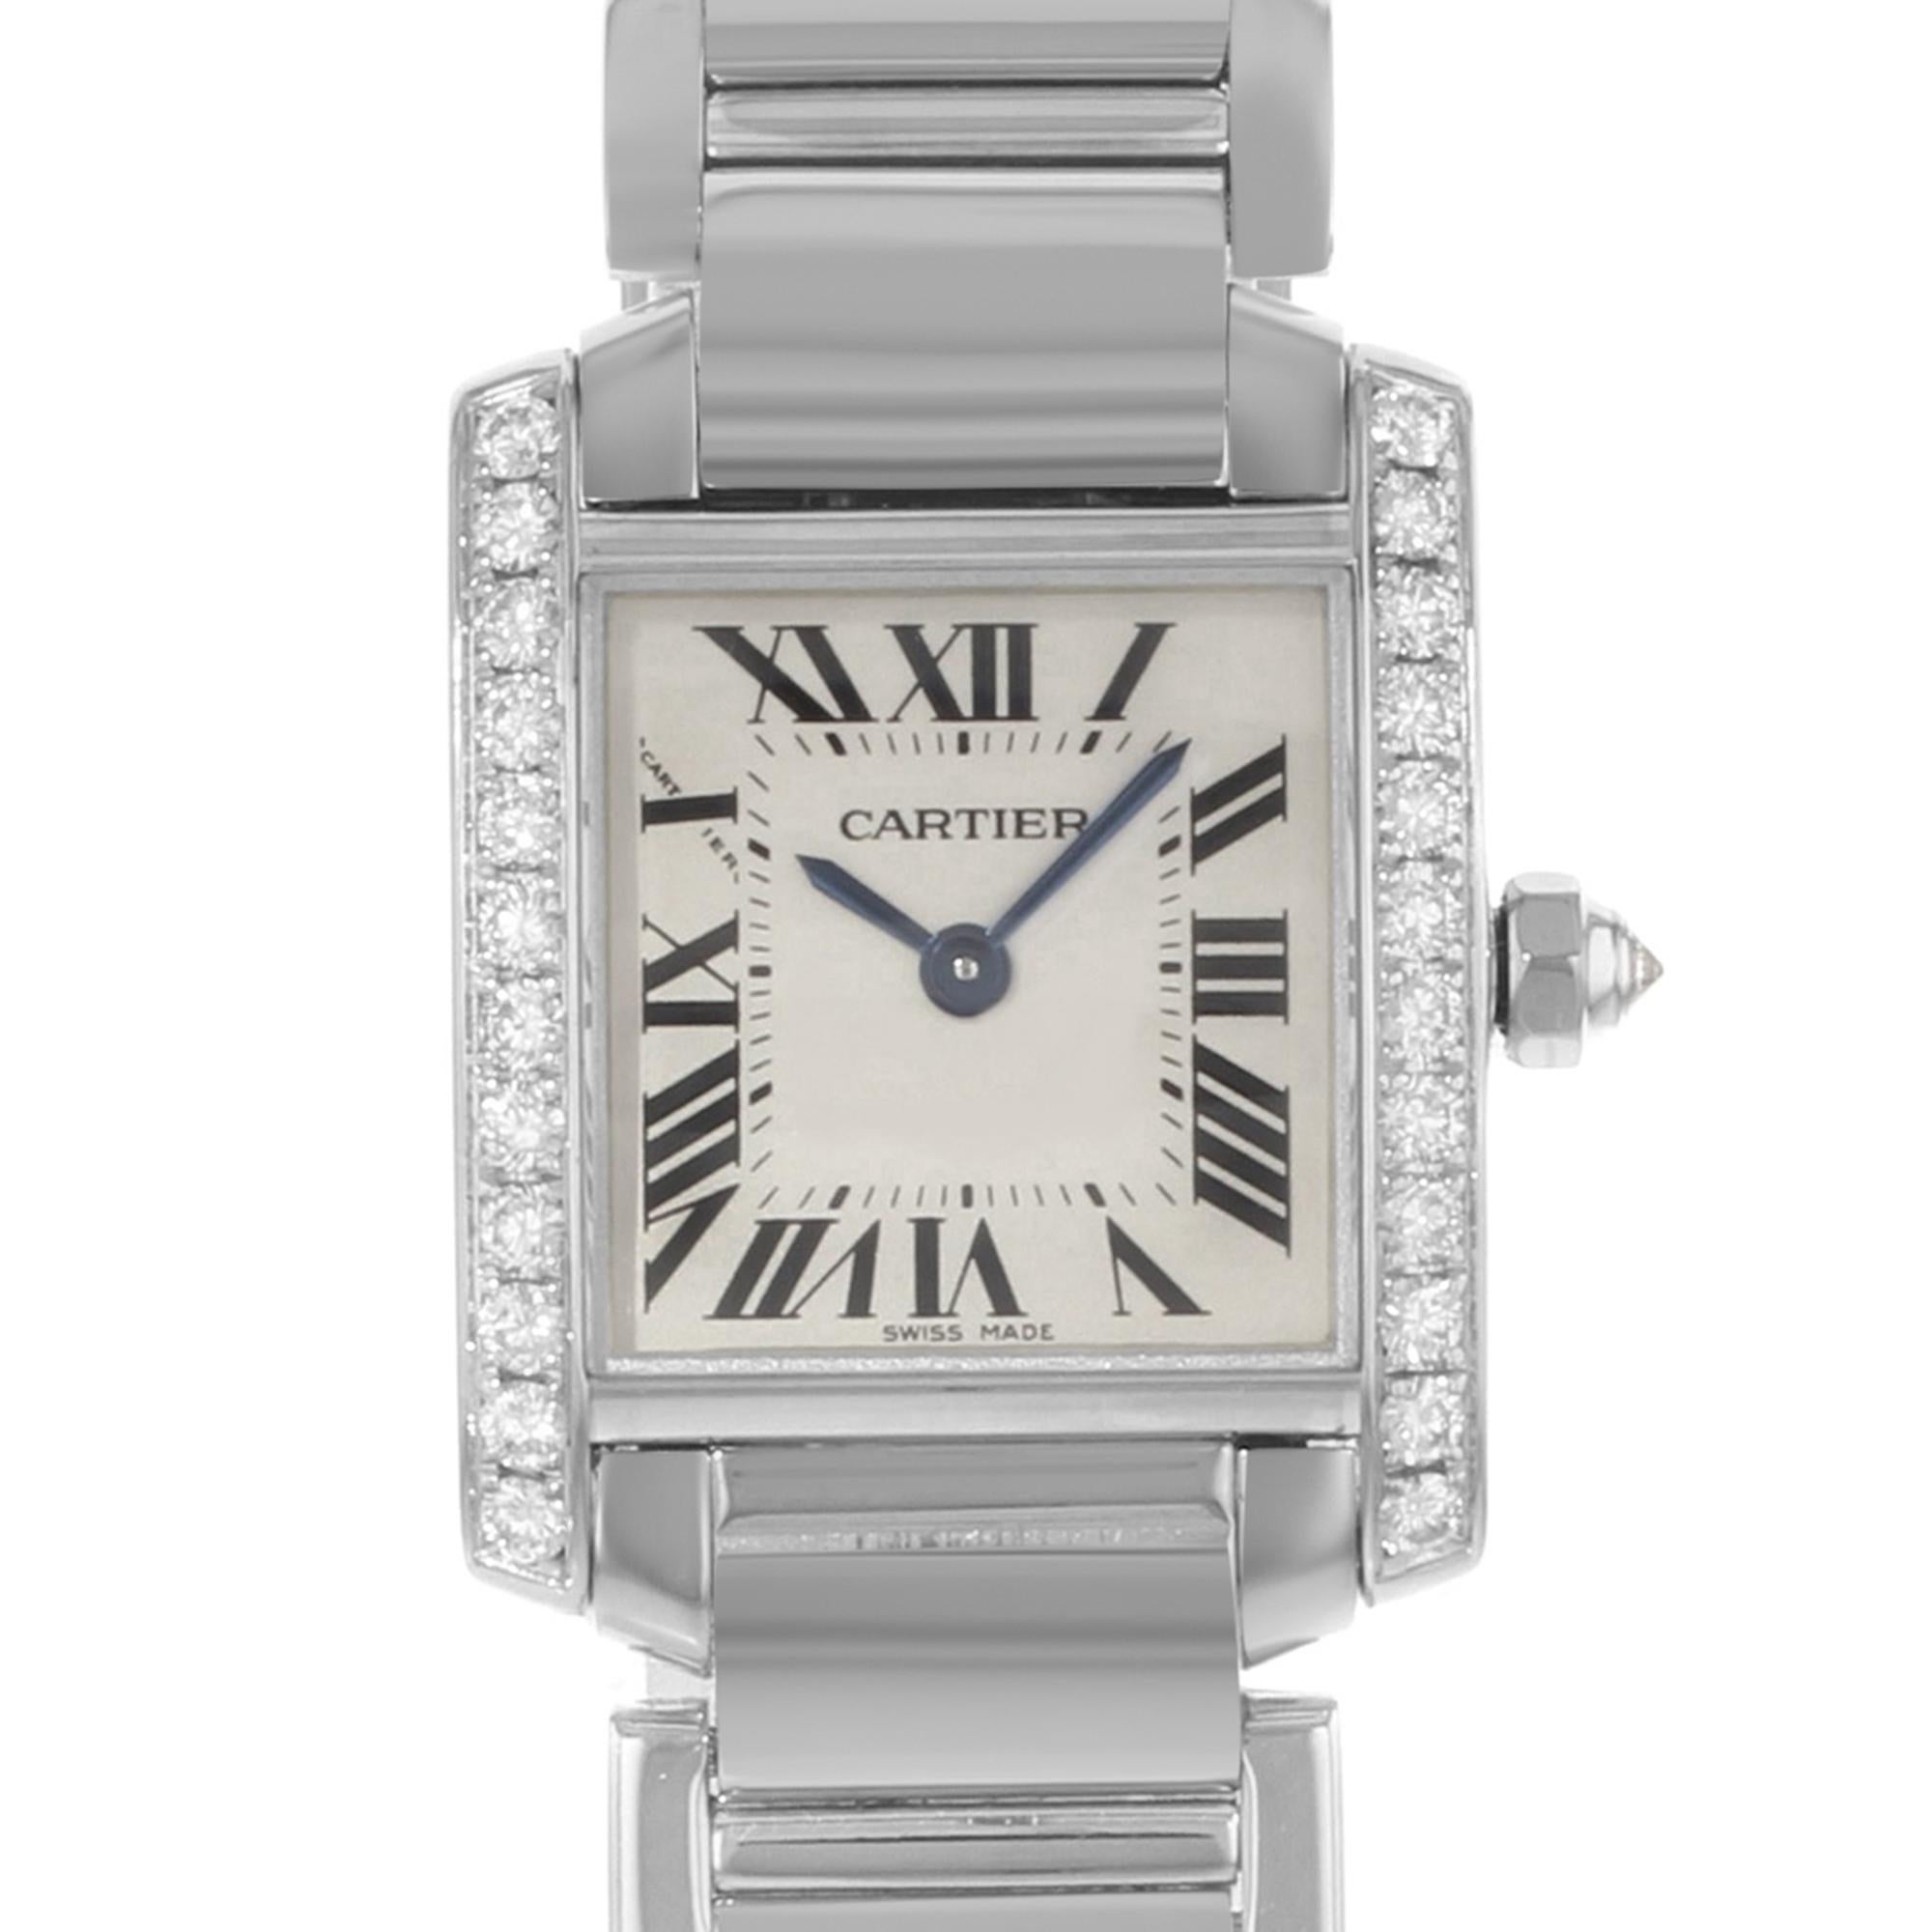 This  never been worn  Cartier Tank  WE1002S3  is a beautiful Ladie's timepiece that is powered by quartz (battery) movement which is cased in a white gold case. It has a square shape face, no features dial and has hand roman numerals style markers.